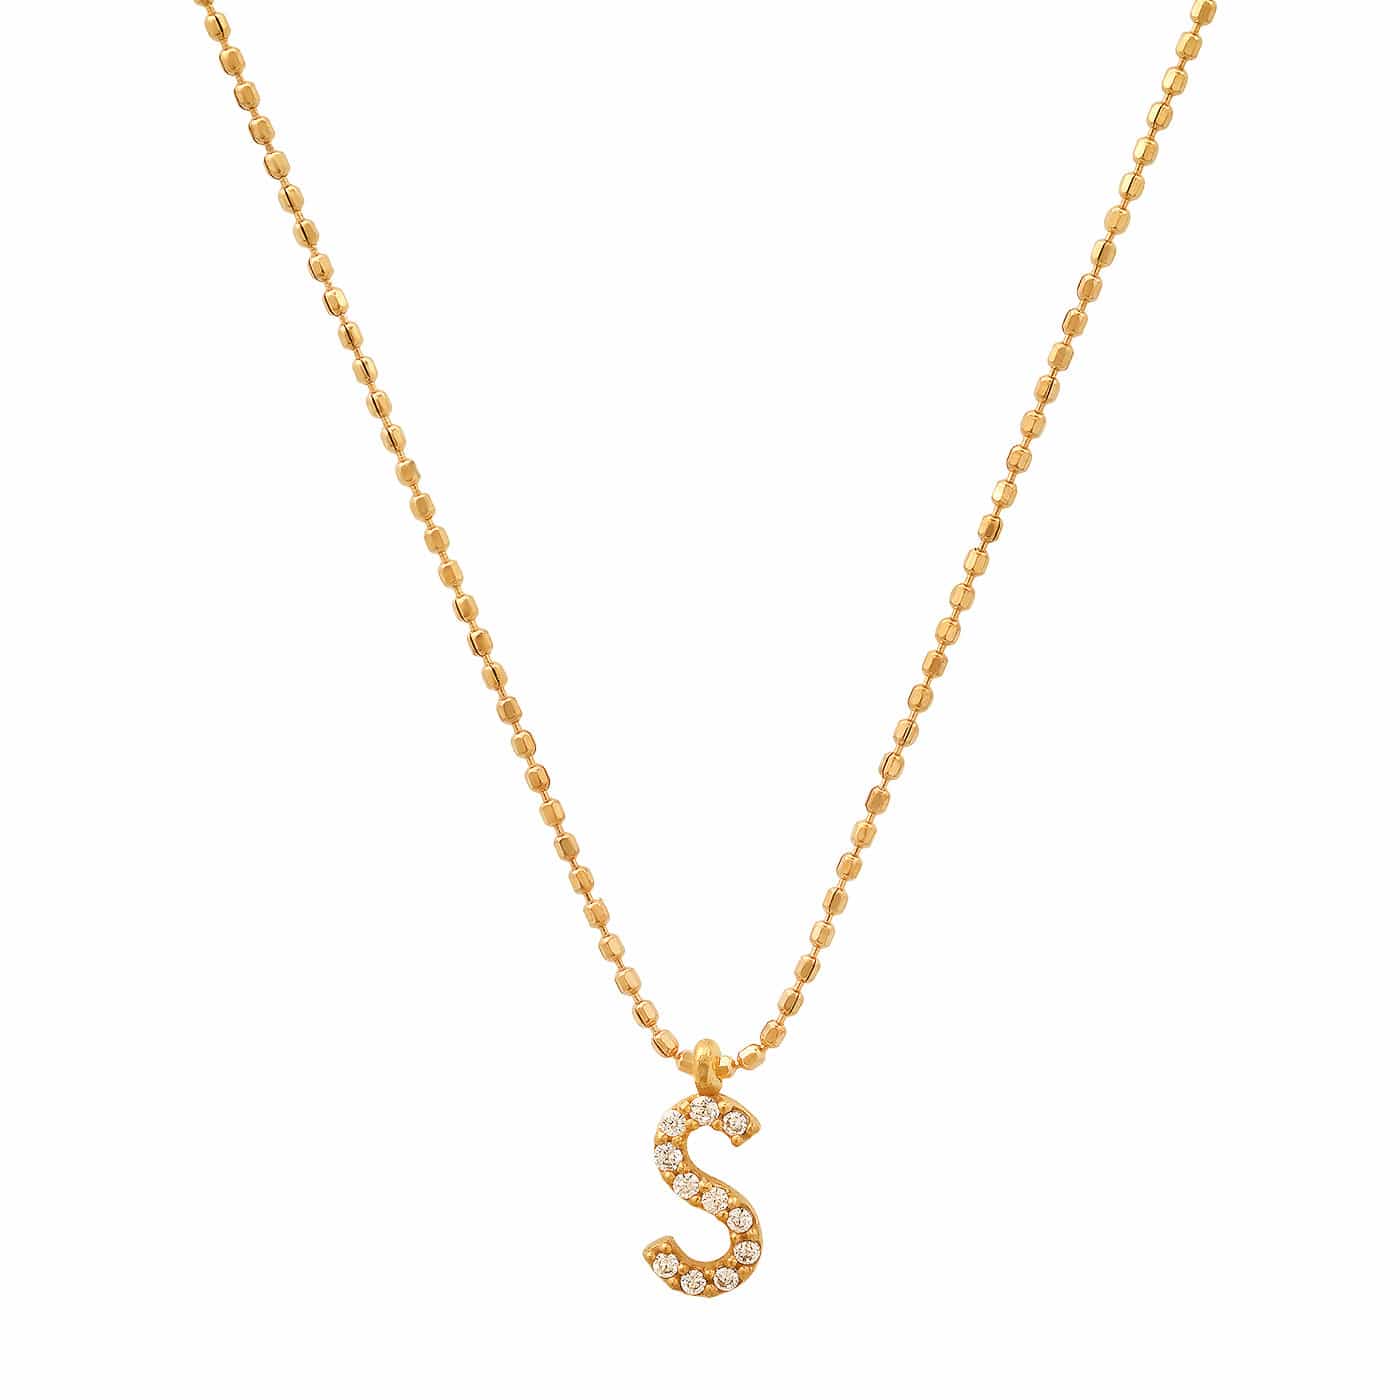 TAI JEWELRY Necklace S Pave Initial Ball Chain Necklace